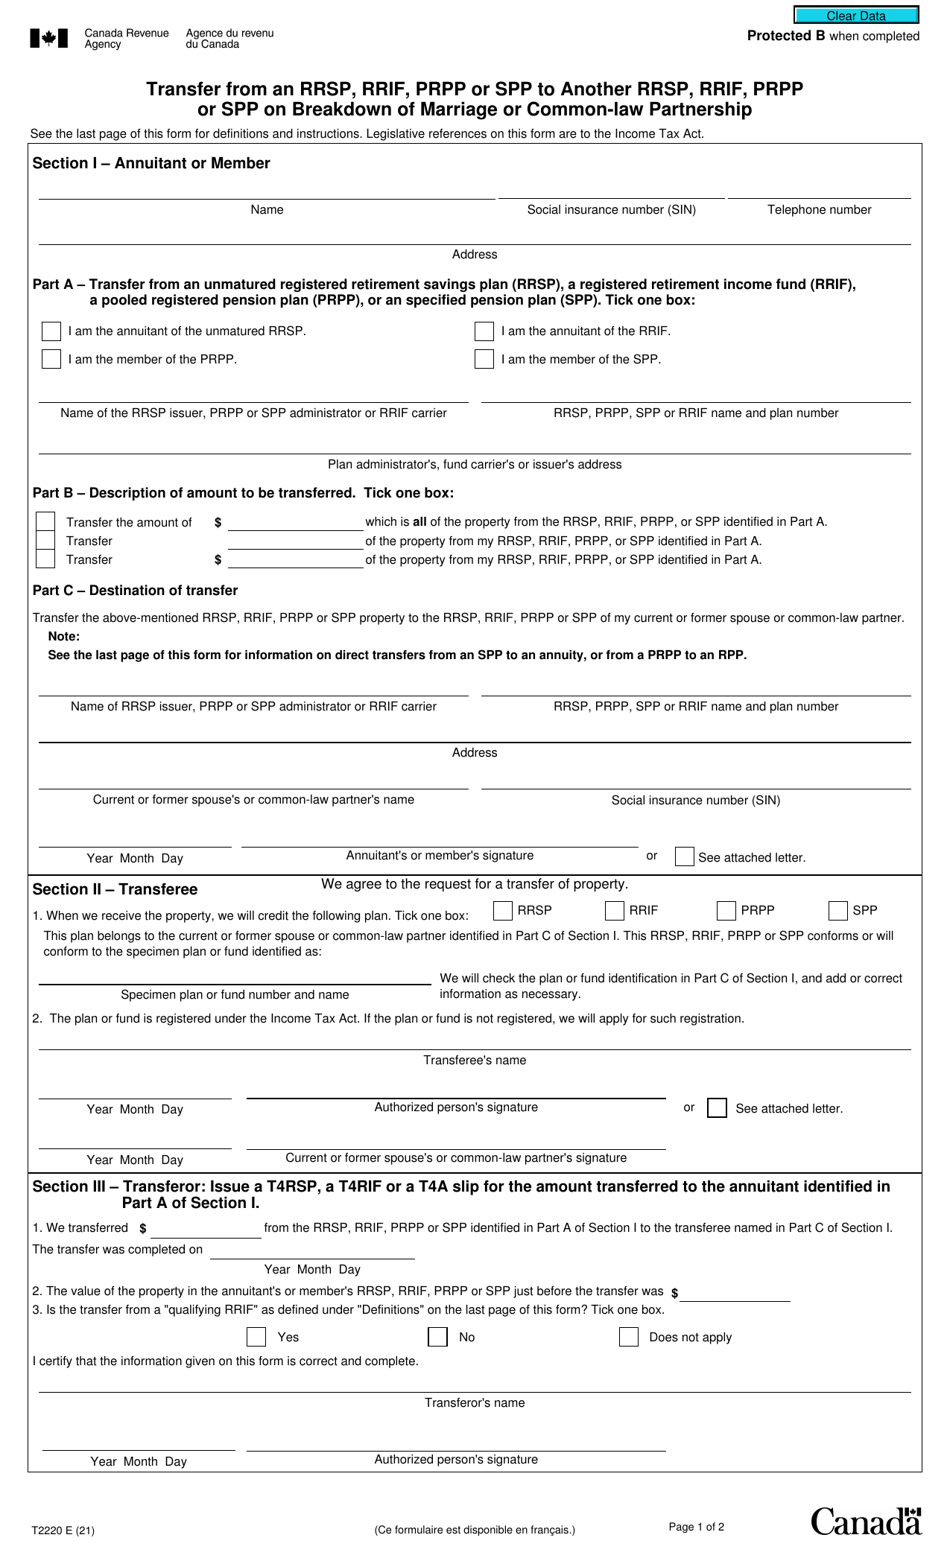 Form T2220 Transfer From an Rrsp, Rrif, Prpp or Spp to Another Rrsp, Rrif, Prpp or Spp on Breakdown of Marriage or Common-Law Partnership - Canada, Page 1